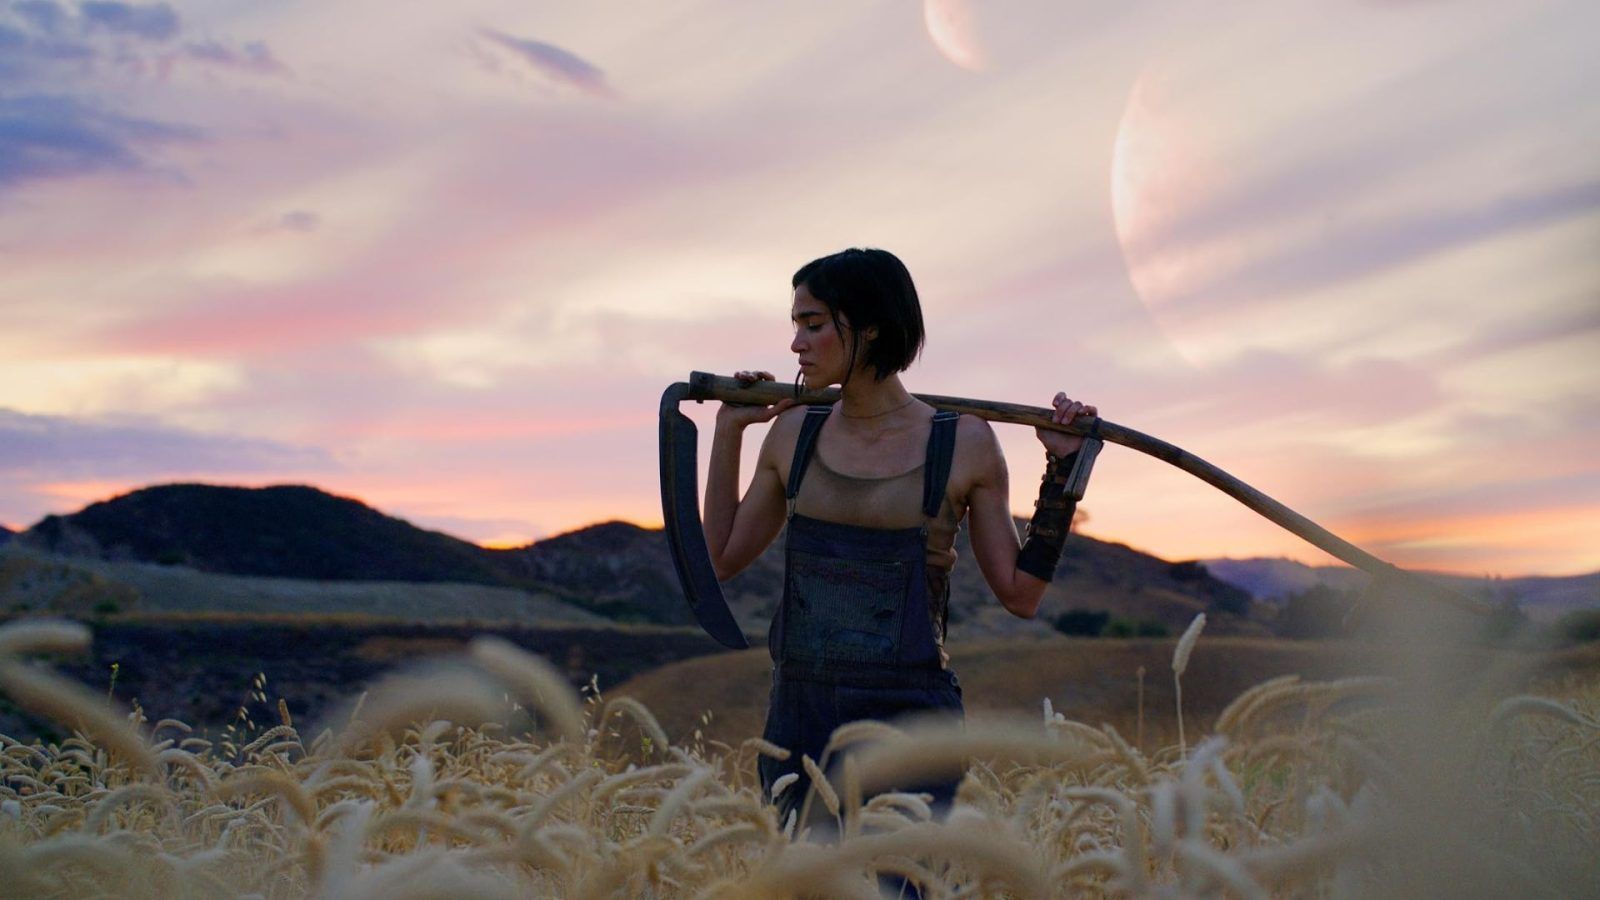 Rebel Moon' release date, cast, trailer, and plot for the Zack